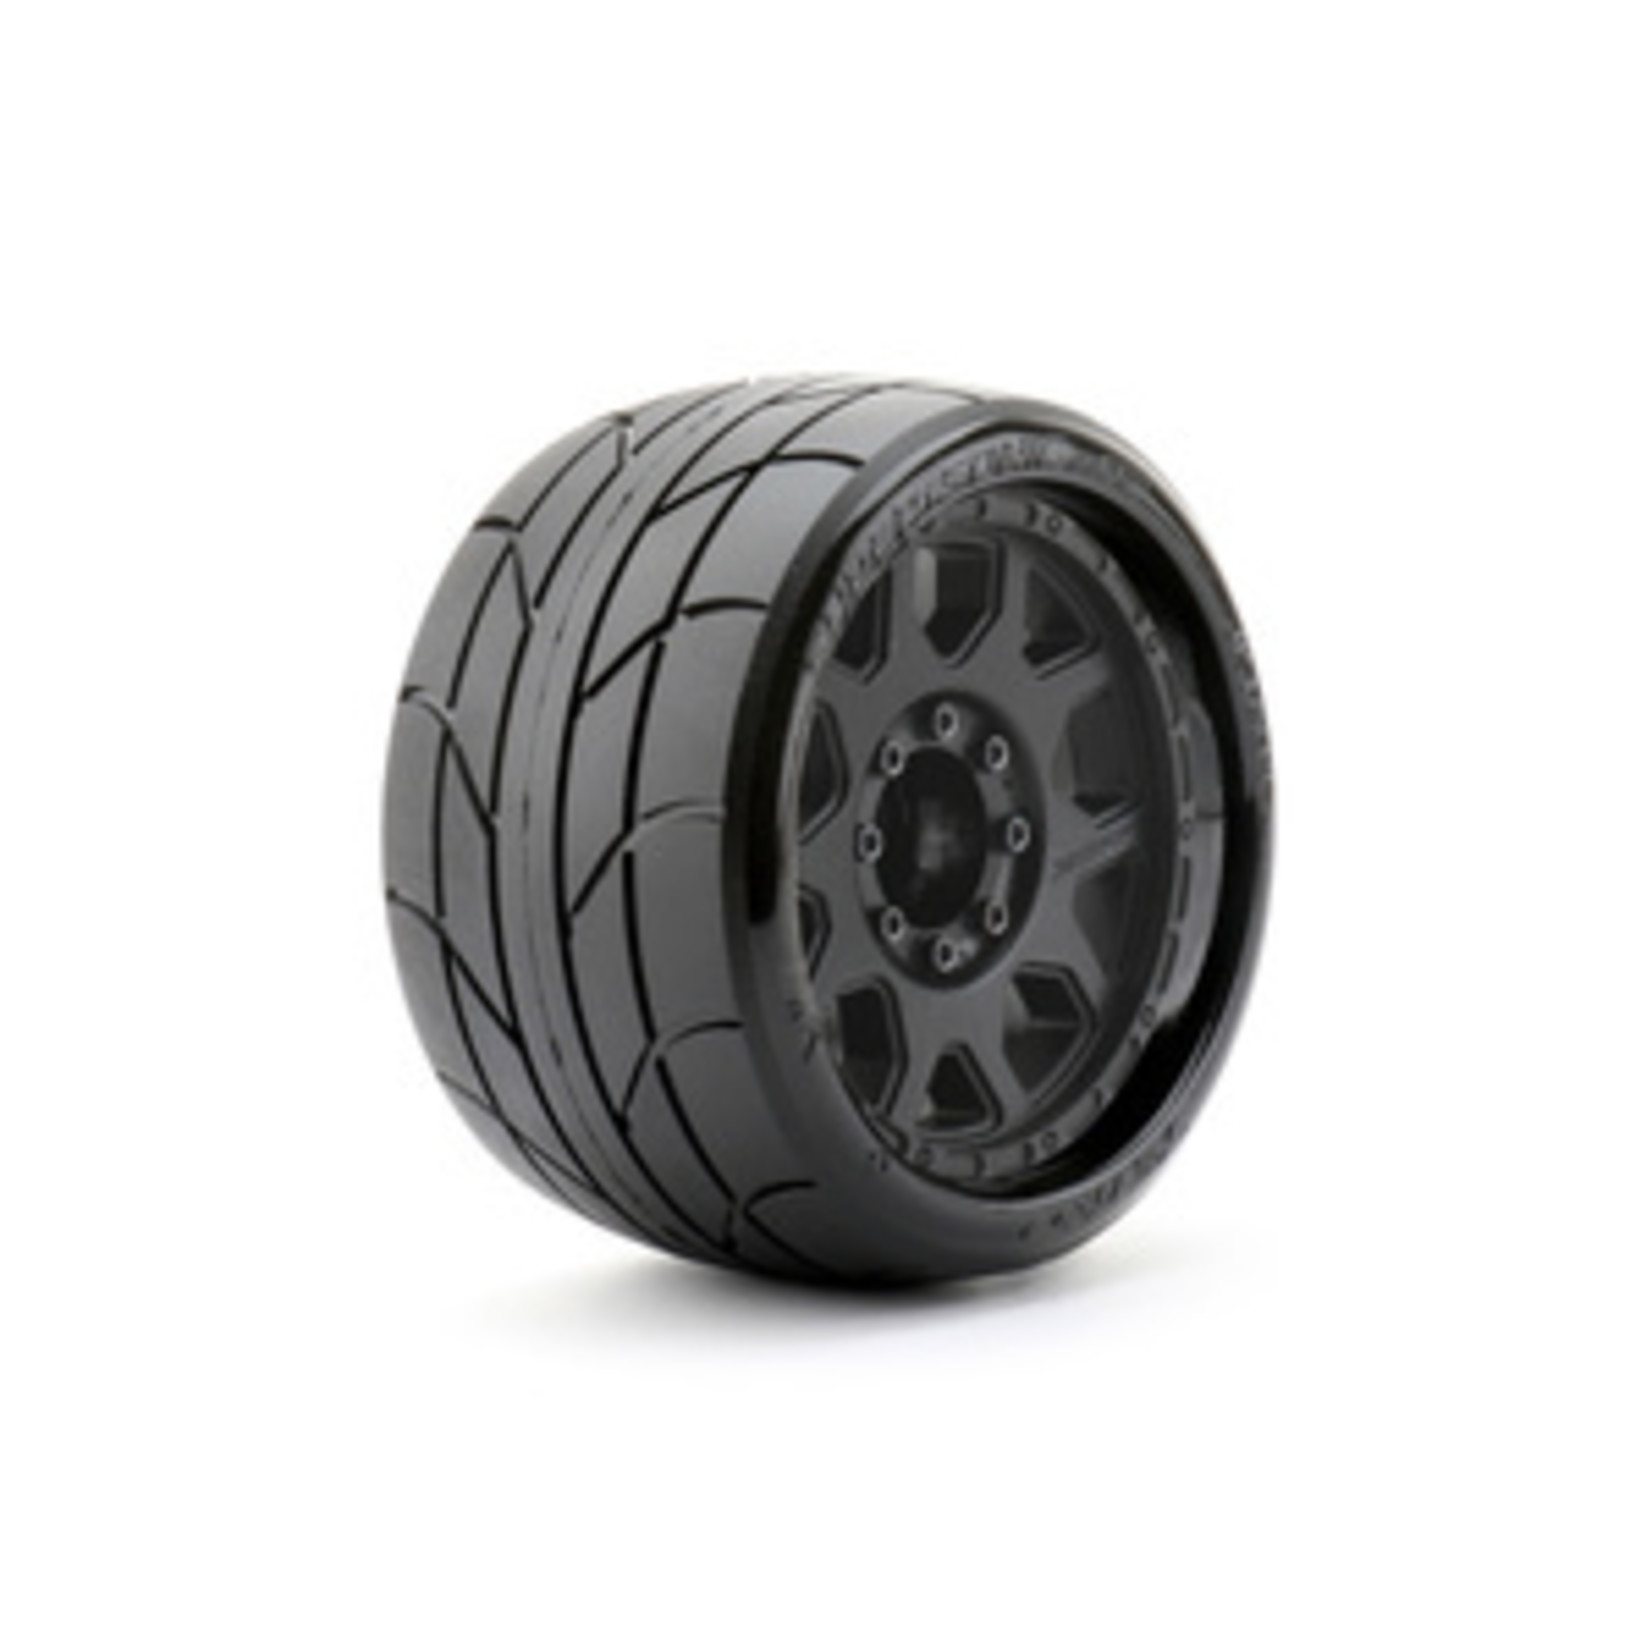 Jetko Tires JKO1604CBMSGBB2 1/8 SGT 3.8 Super Sonic Tires Mounted on Black  Claw Rims, Medium Soft, Belted, 17mm 1/2